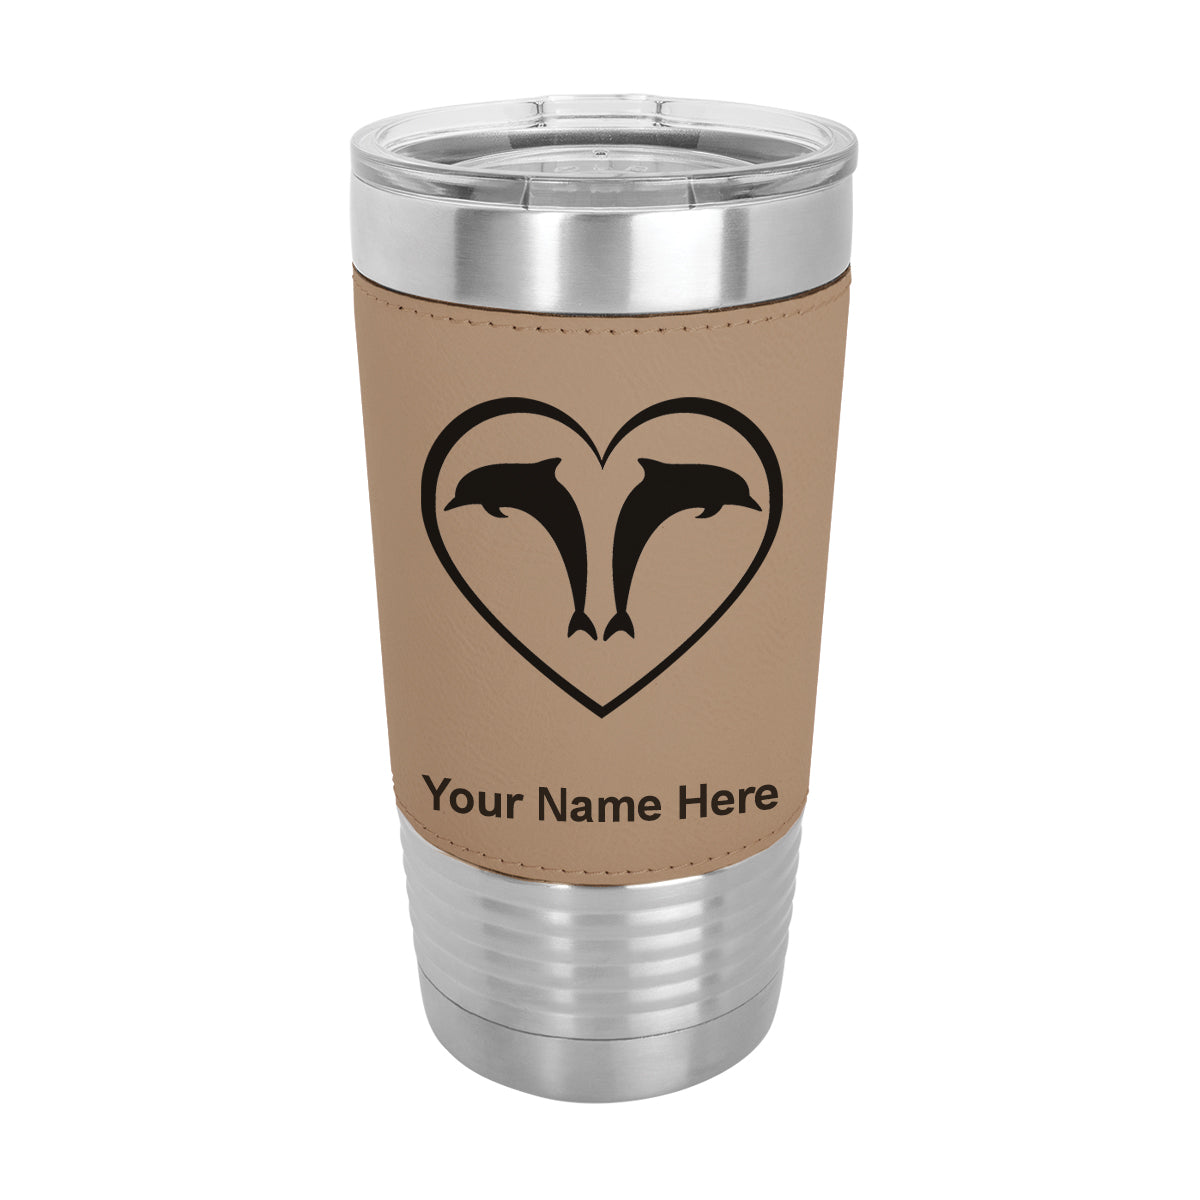 20oz Faux Leather Tumbler Mug, Dolphin Heart, Personalized Engraving Included - LaserGram Custom Engraved Gifts